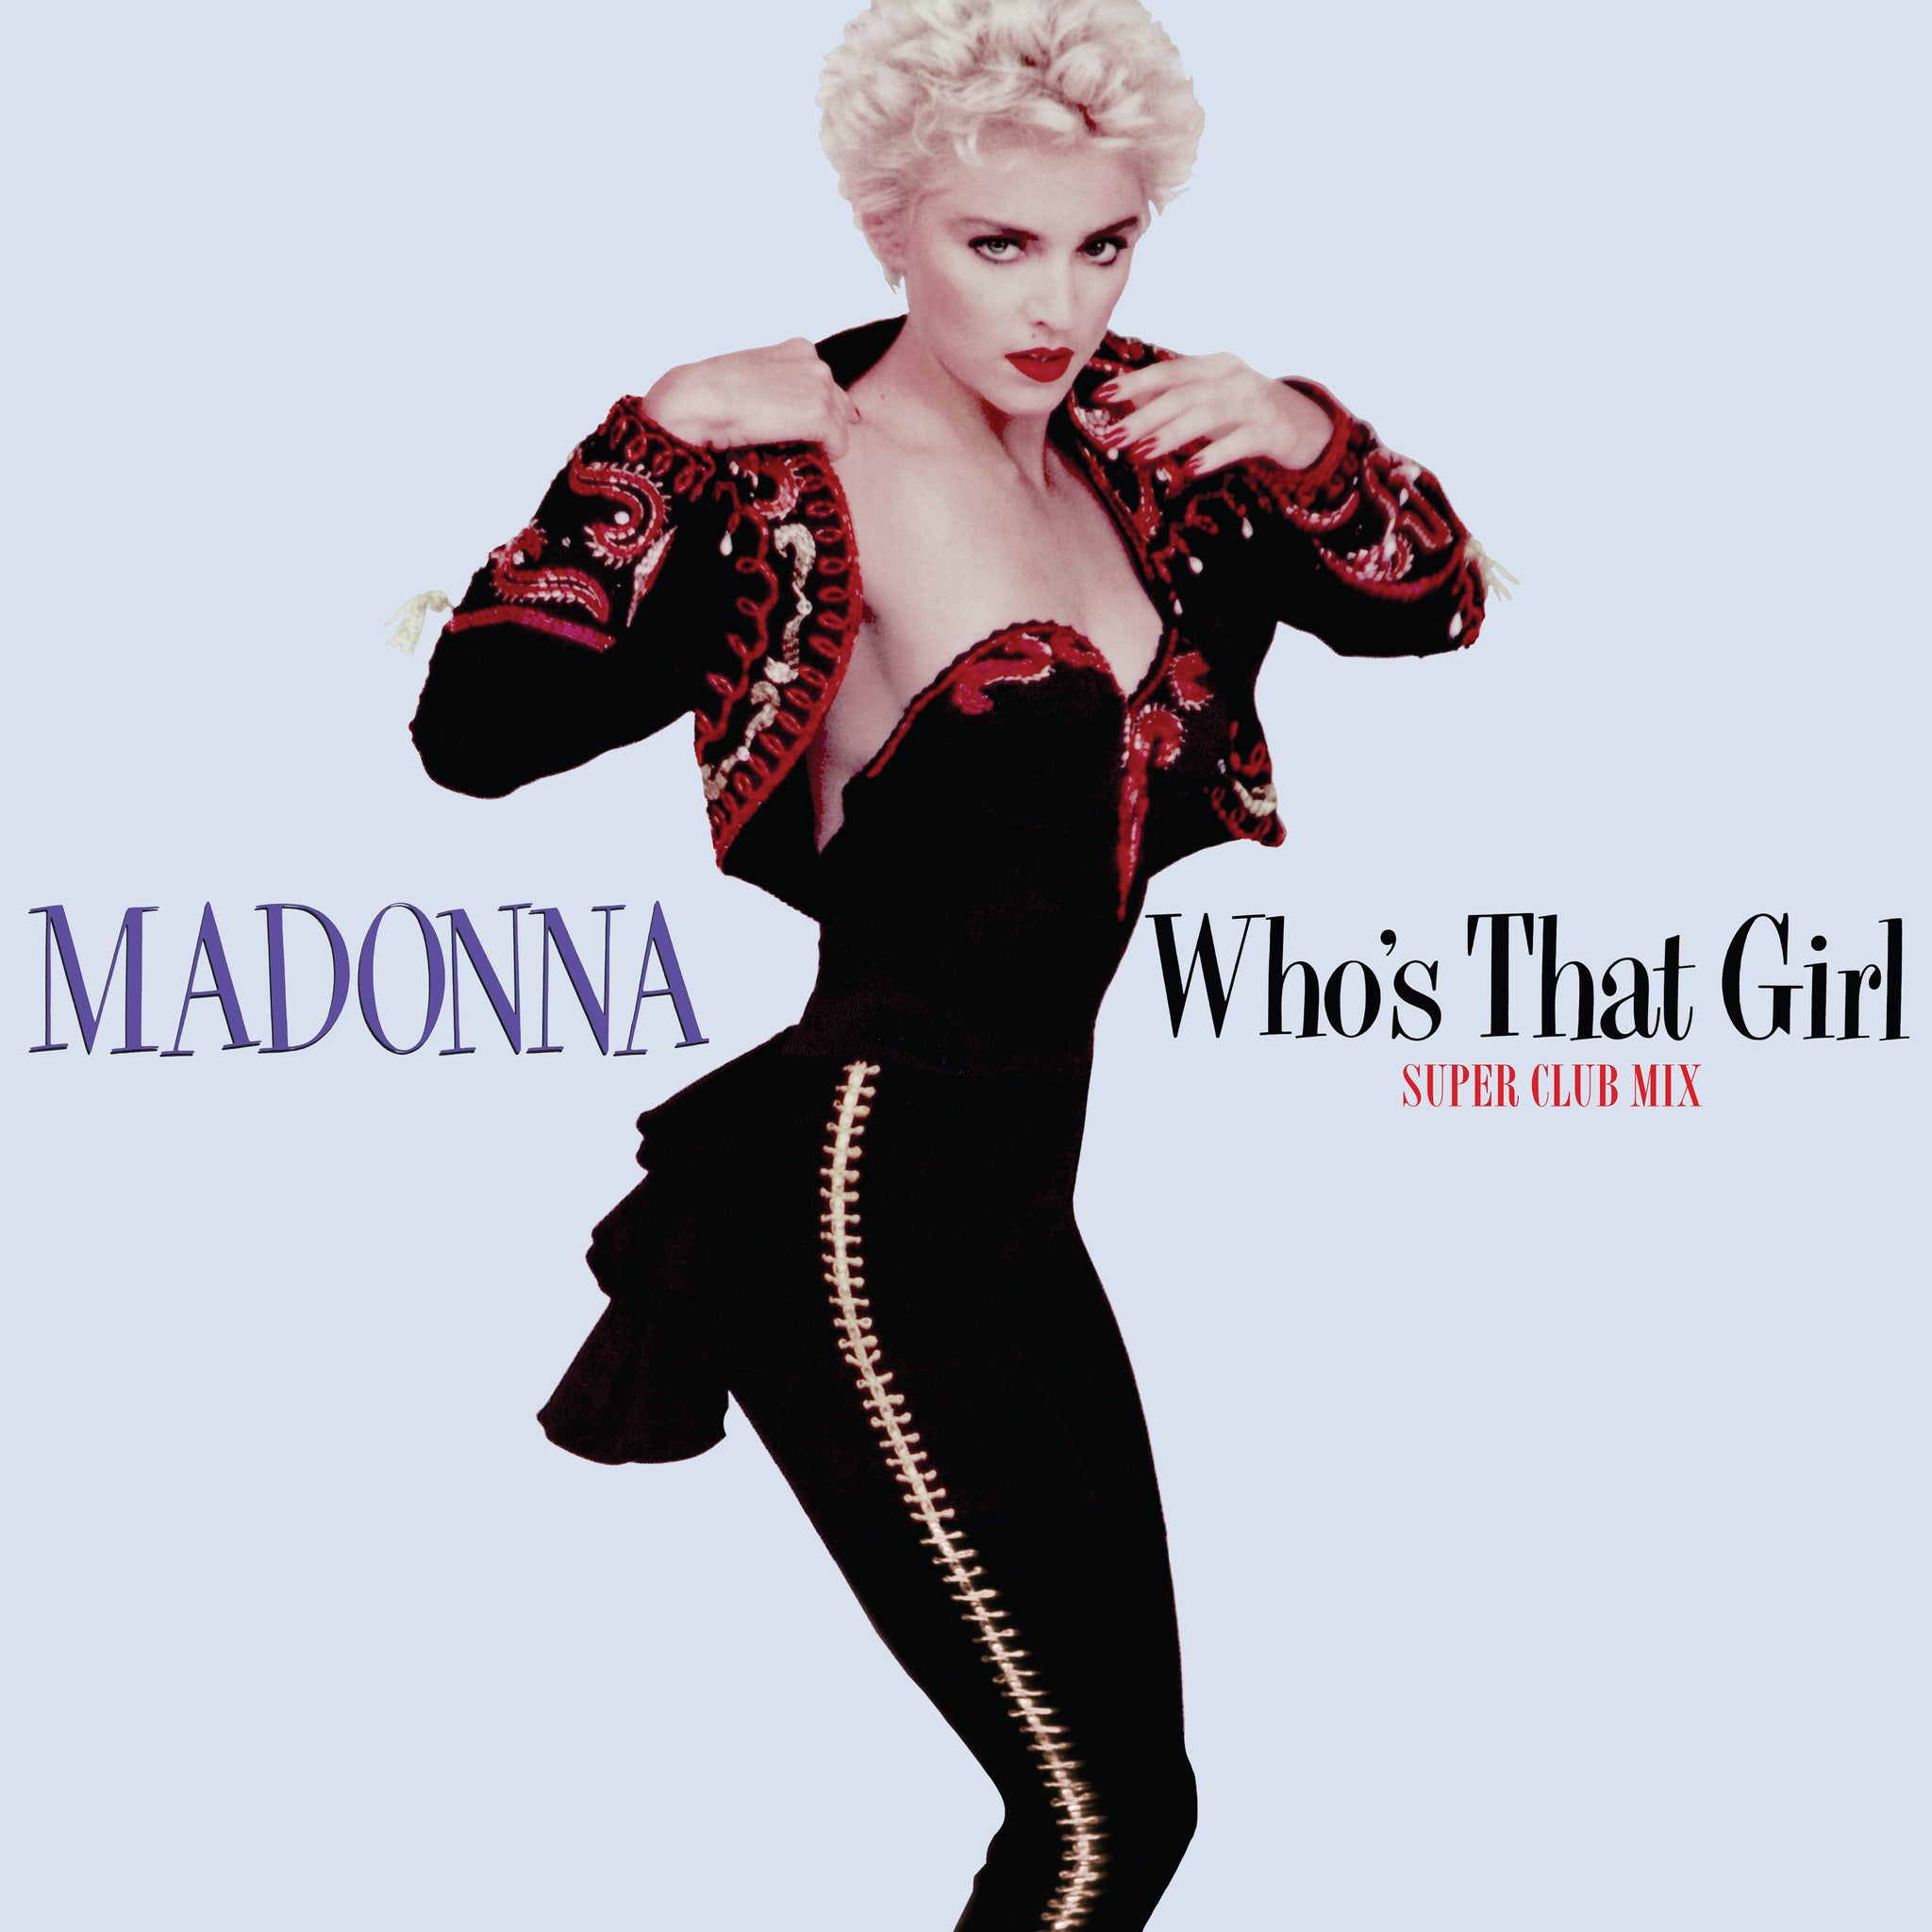 Madonna	Who's That Girl / Causing a Commotion GREEN COLOURED VINYL 12" (RSD22)